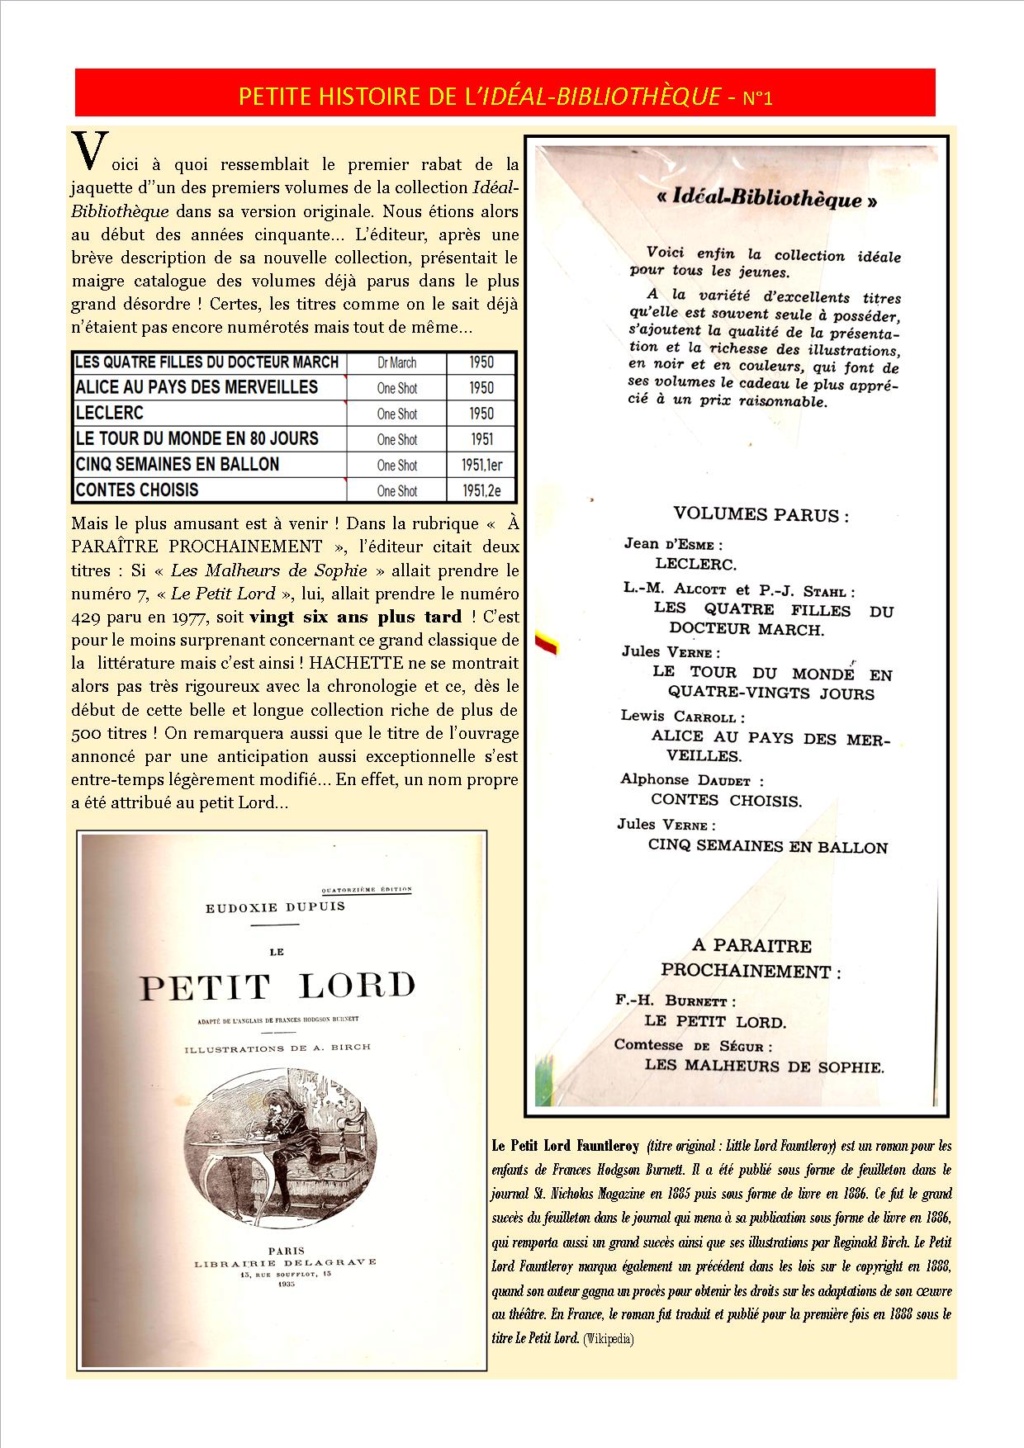 IDEAL-BIBLIOTHEQUE - Page 10 Ib0111